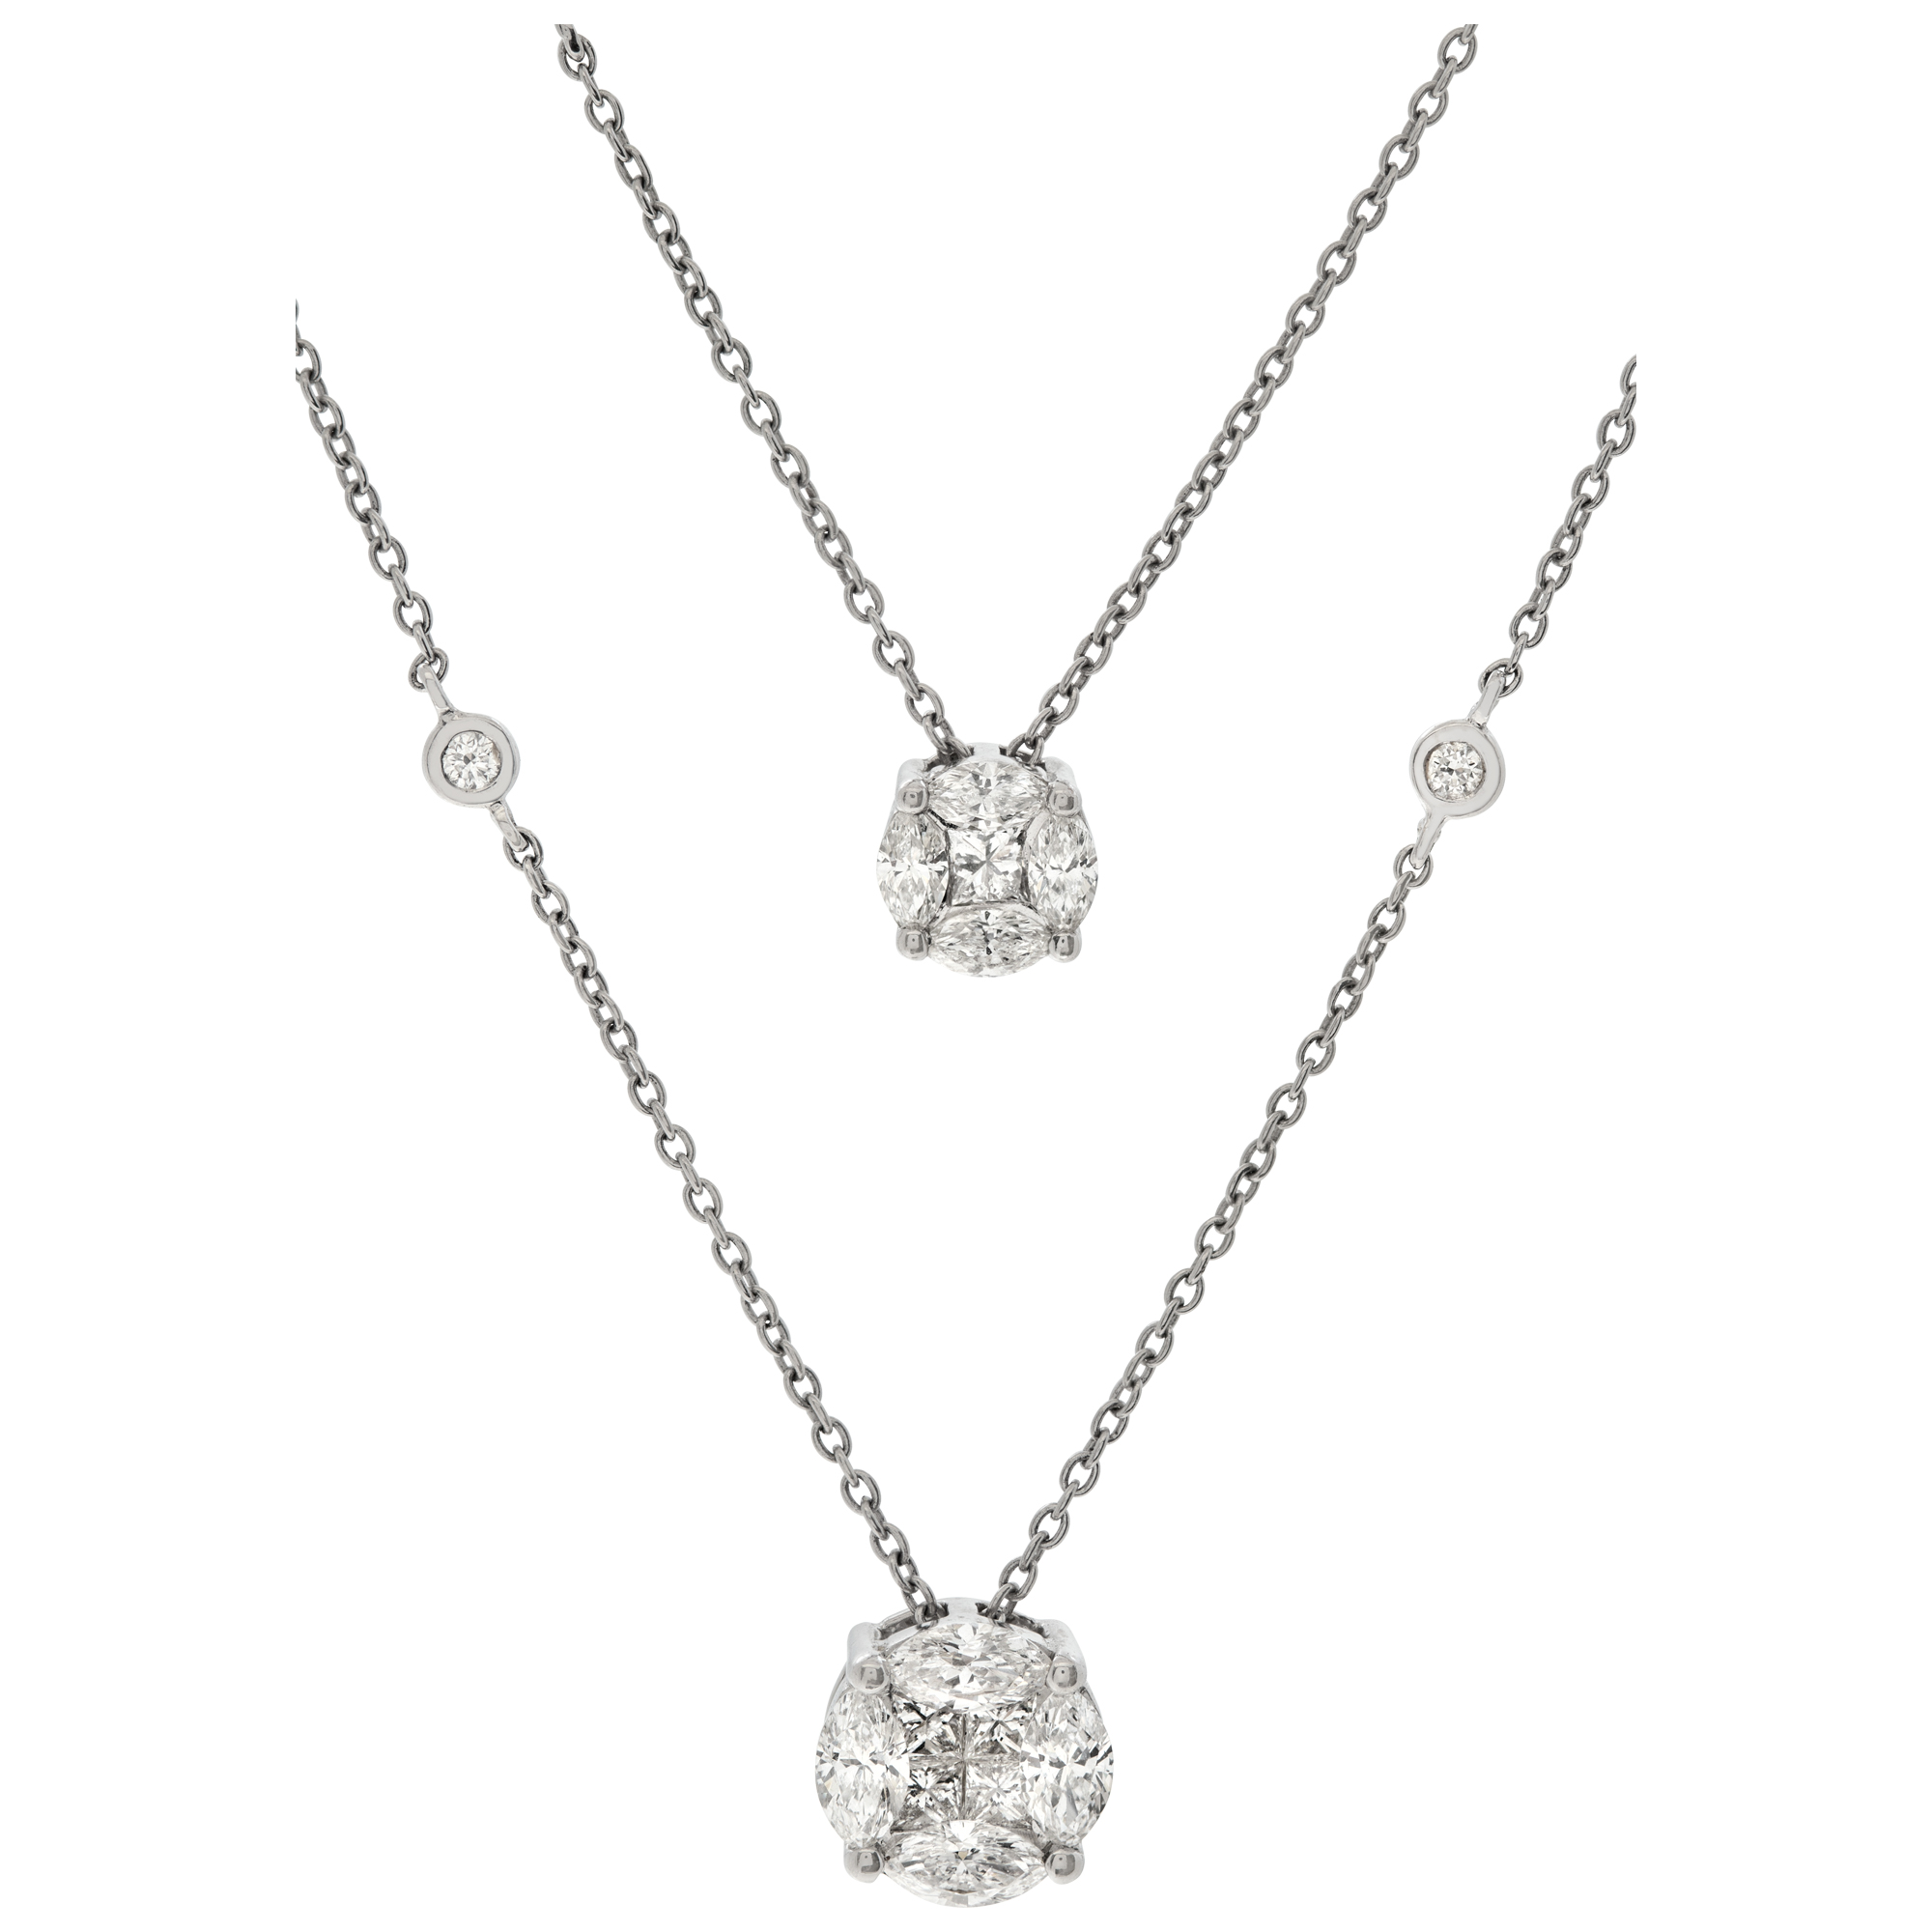 Double row necklace with diamond pendants in 18k white gold 1.71 carat